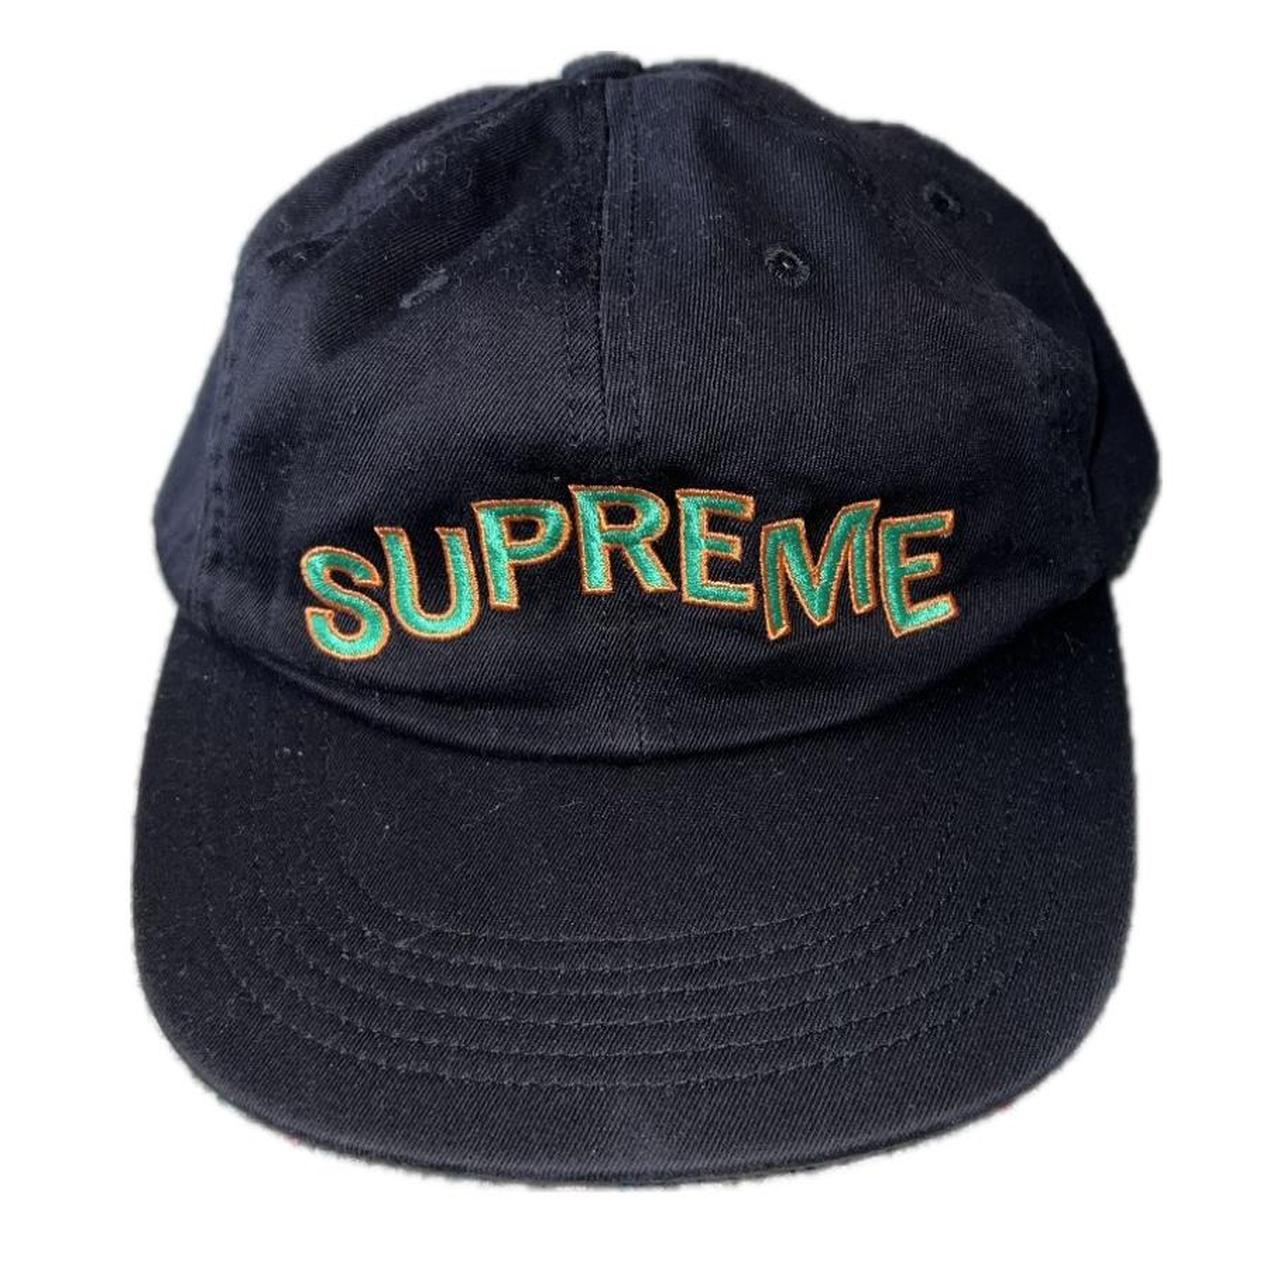 Men's Supreme Hats, Preowned & Secondhand